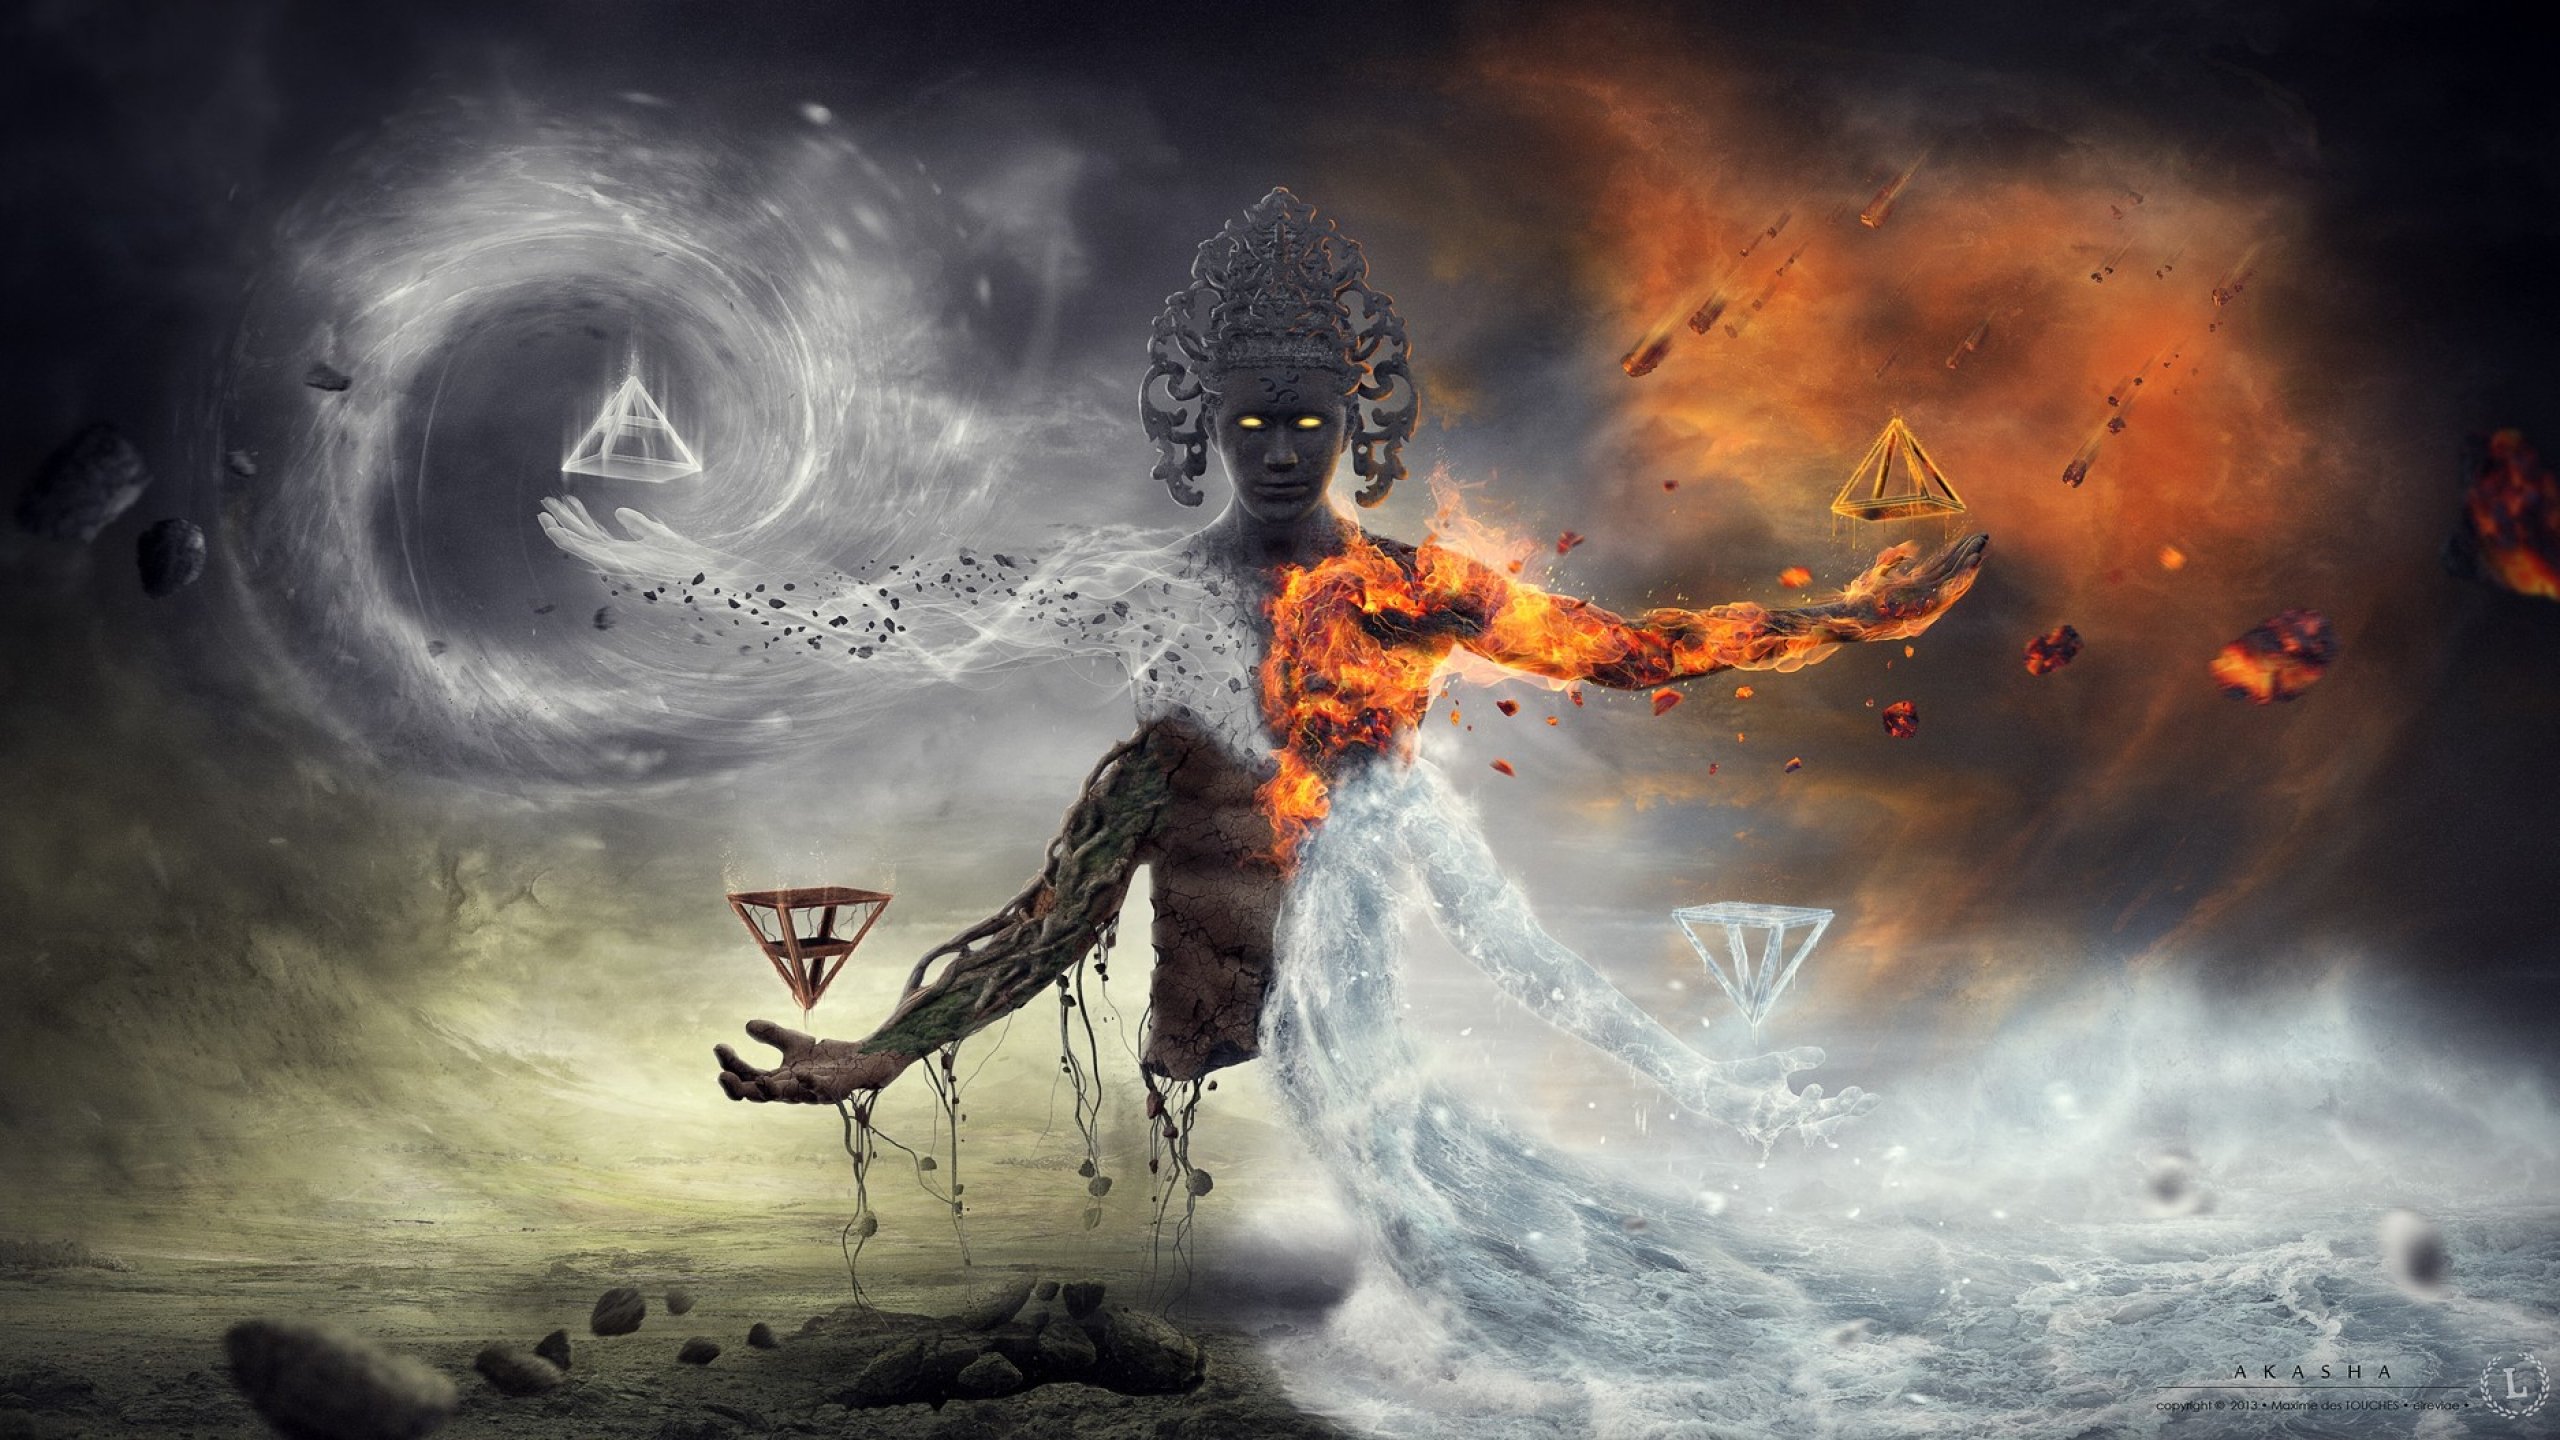 General 2560x1440 religion God fire wind water dirt The Spirit Element (Akasha) – The Wiccan Elements digital art watermarked